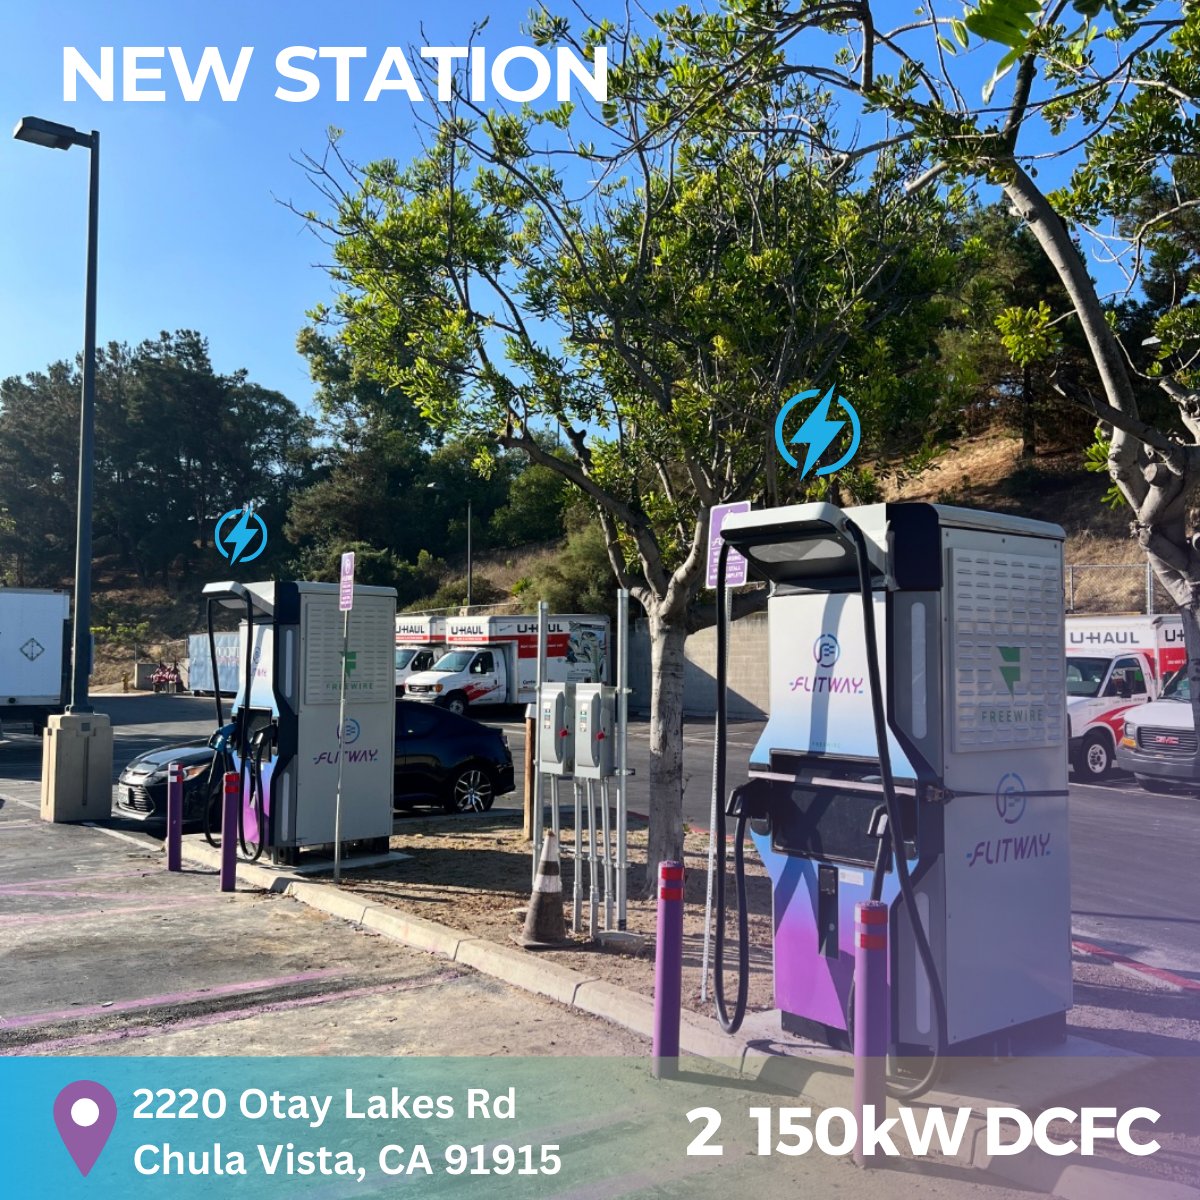 Thrilled to announce the opening of our newest EV charging station at 2220 Otay Lakes Rd, Chula Vista, CA 91915! 

#evcharging #evcharger #evchargingstation #evadoption #chulavista #southerncalifornia #dcfc #ElectricVehicle